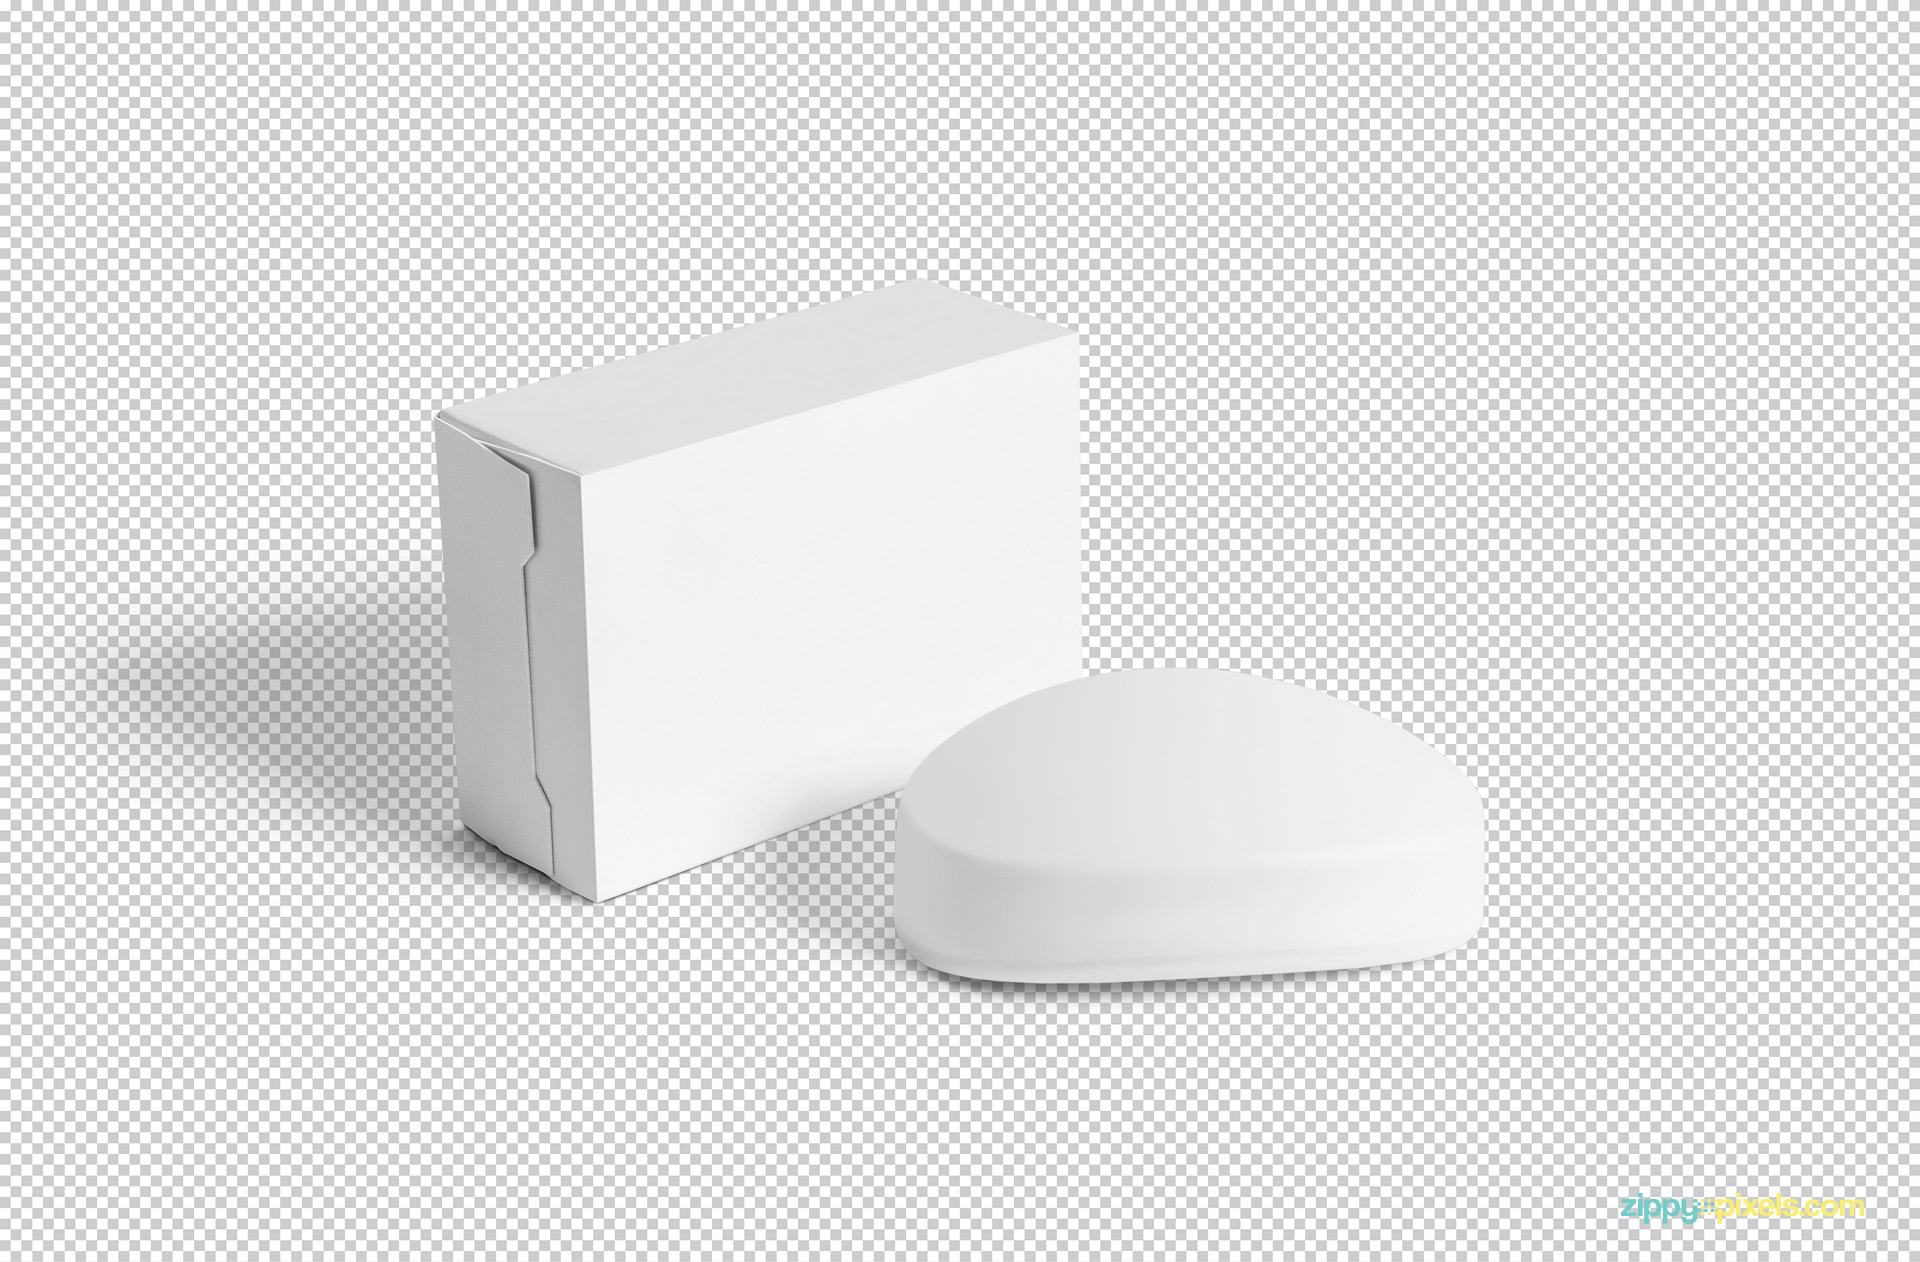 Use Adobe Photoshop for editing every single part of this free box and soap mockup.